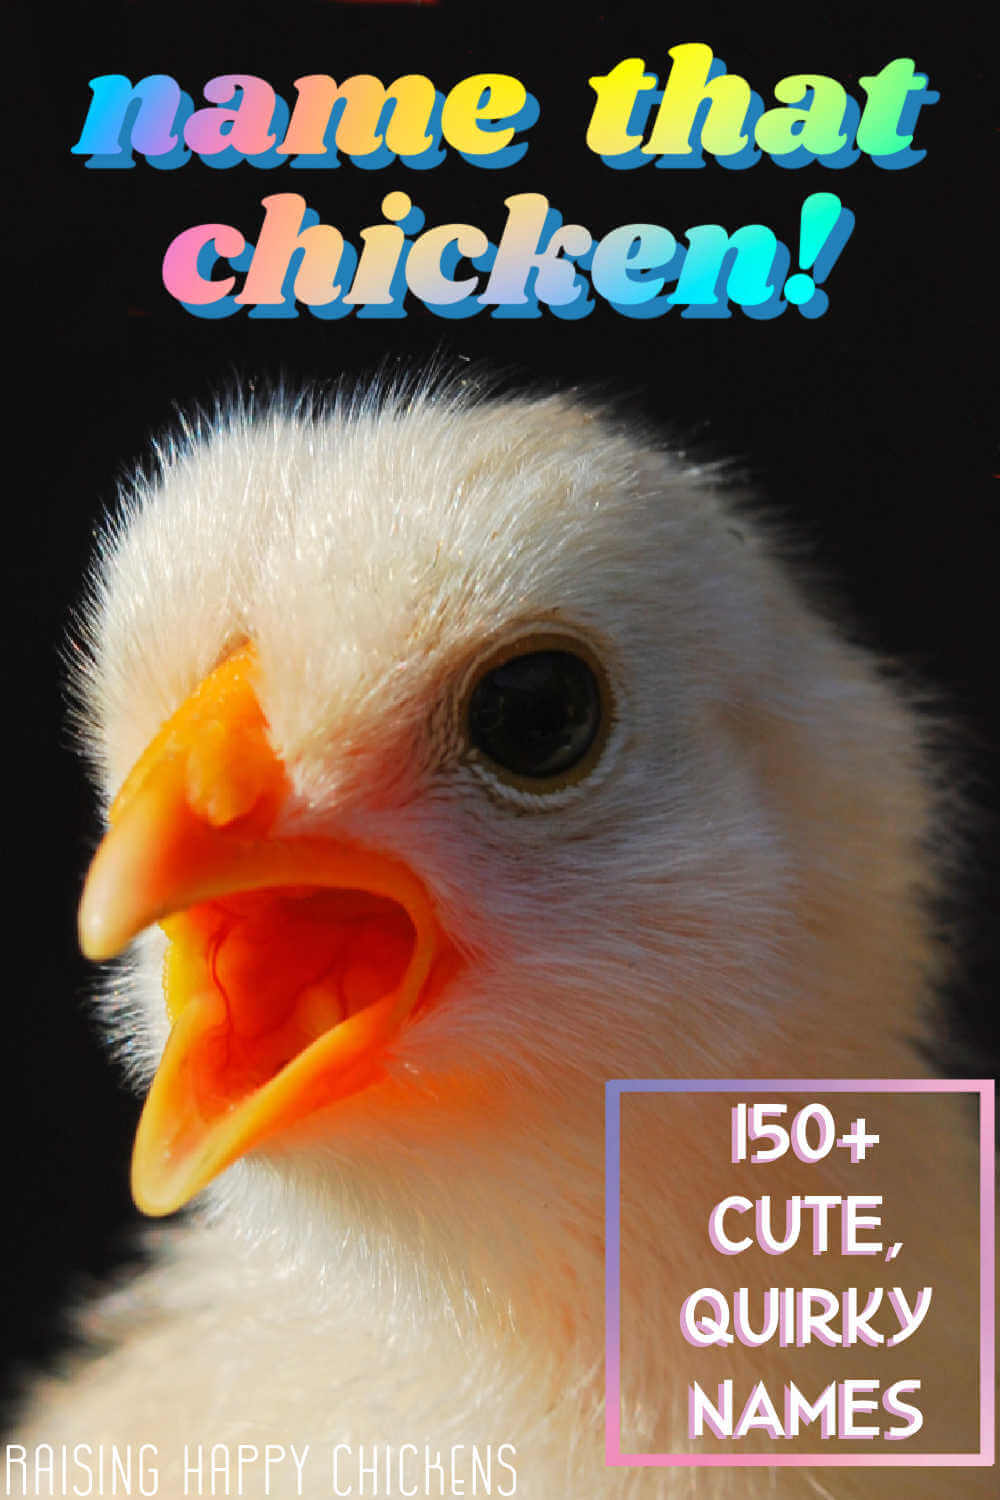 150+ unique chicken names to choose for your flock!